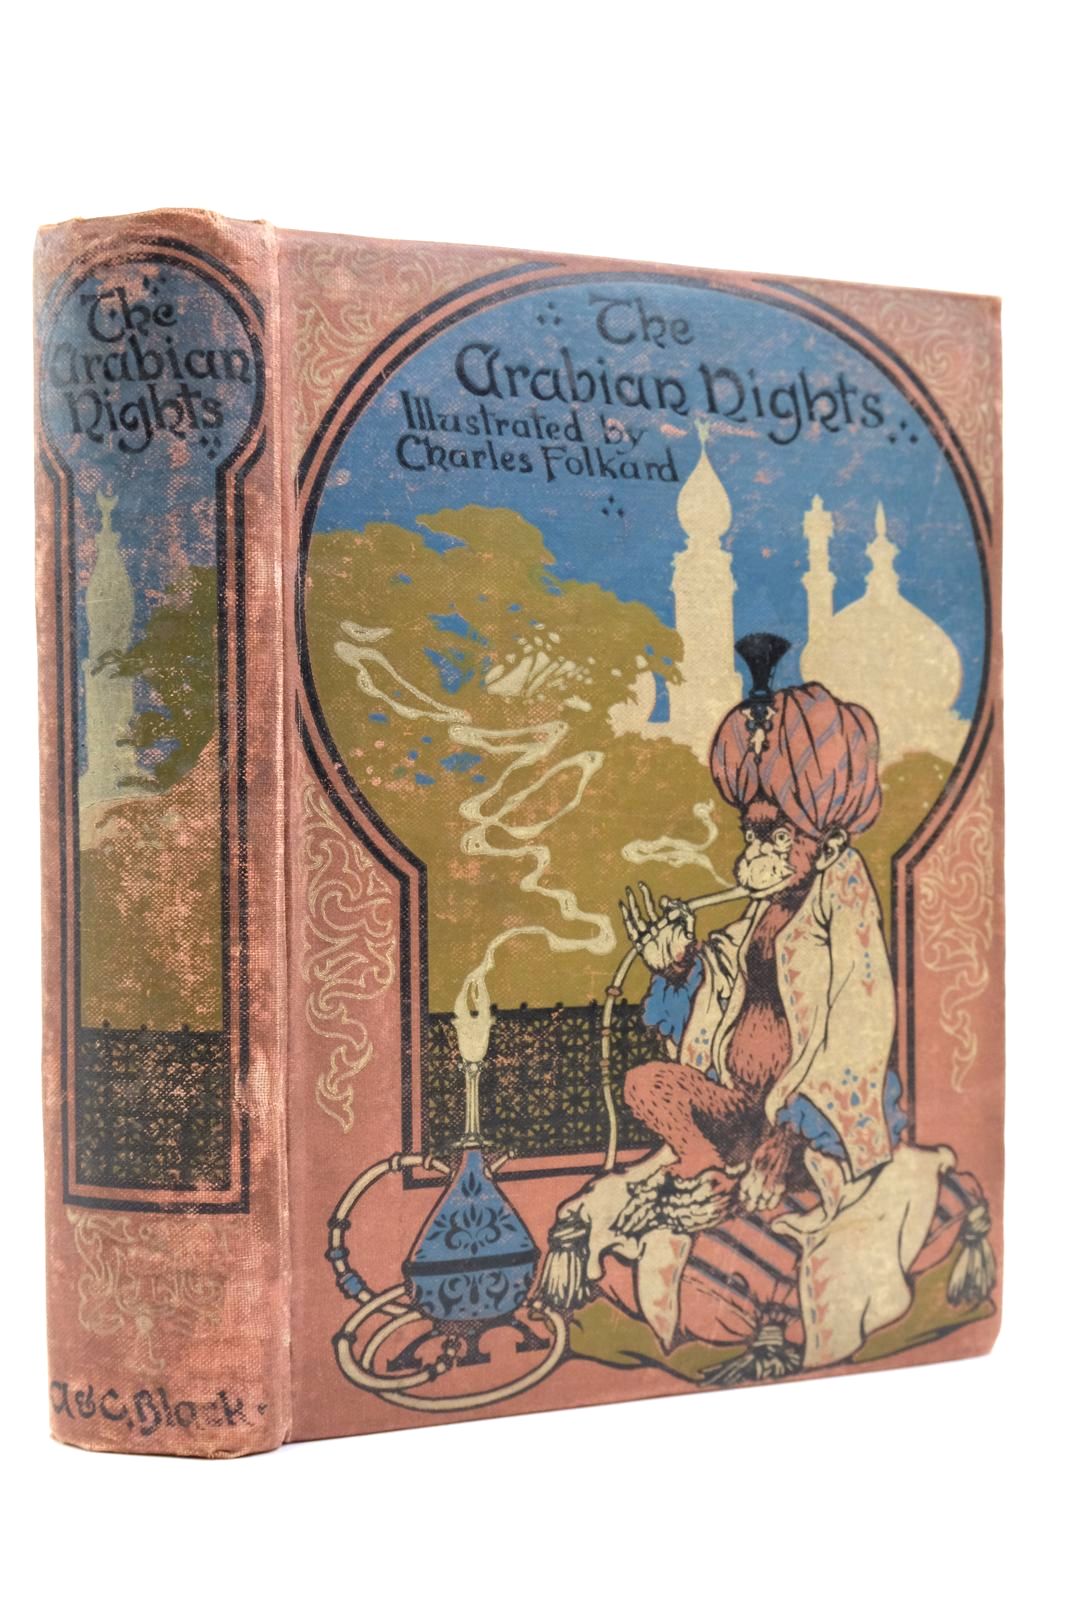 Photo of THE ARABIAN NIGHTS illustrated by Folkard, Charles published by A. & C. Black Ltd. (STOCK CODE: 2138968)  for sale by Stella & Rose's Books